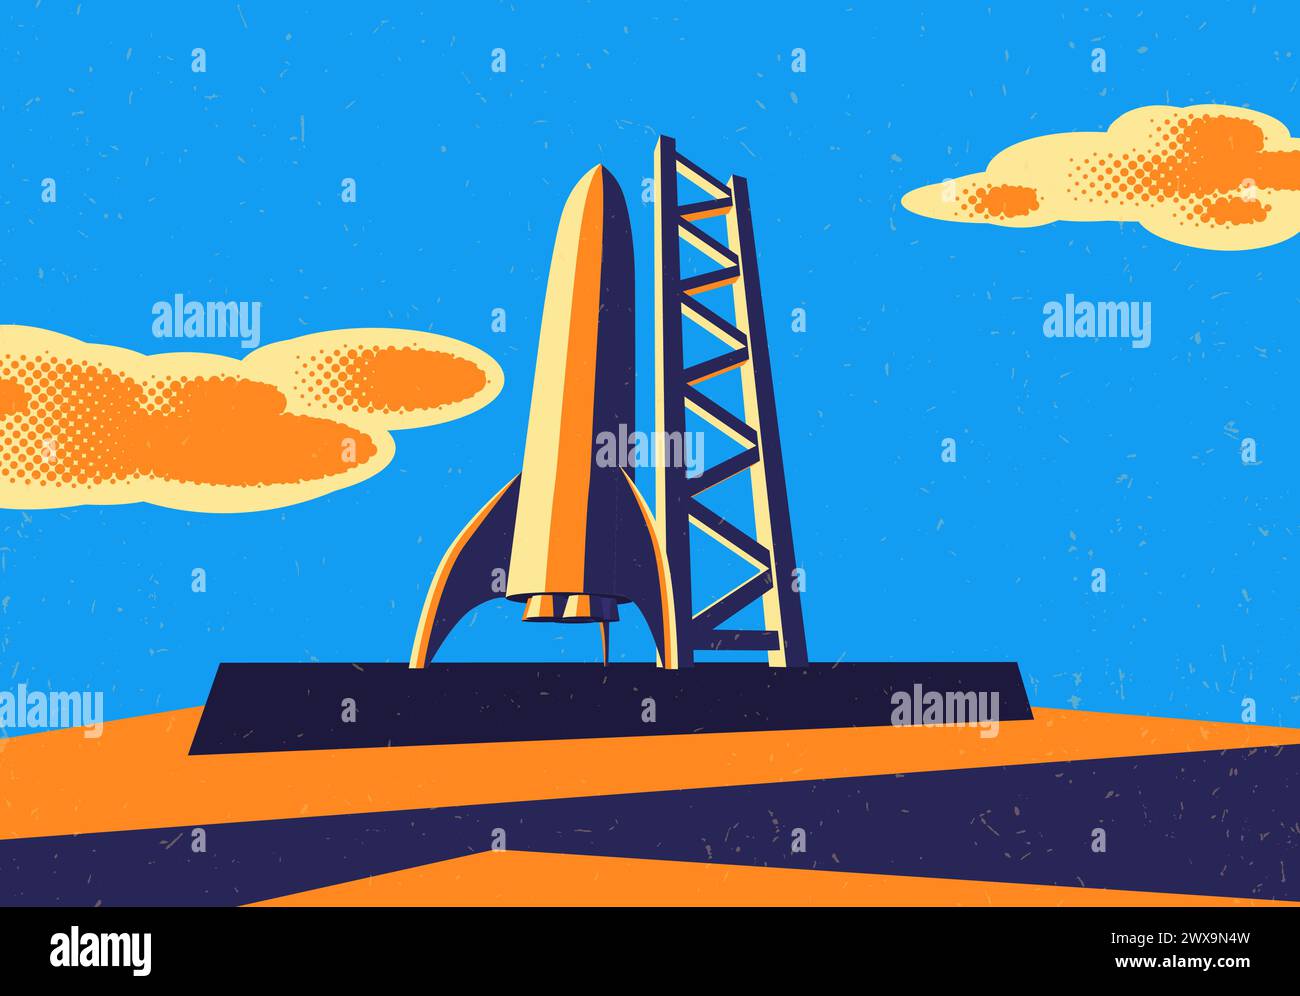 Rocket ready to take off on launch site. Retro styled sci-fi spaceship science concept Stock Vector